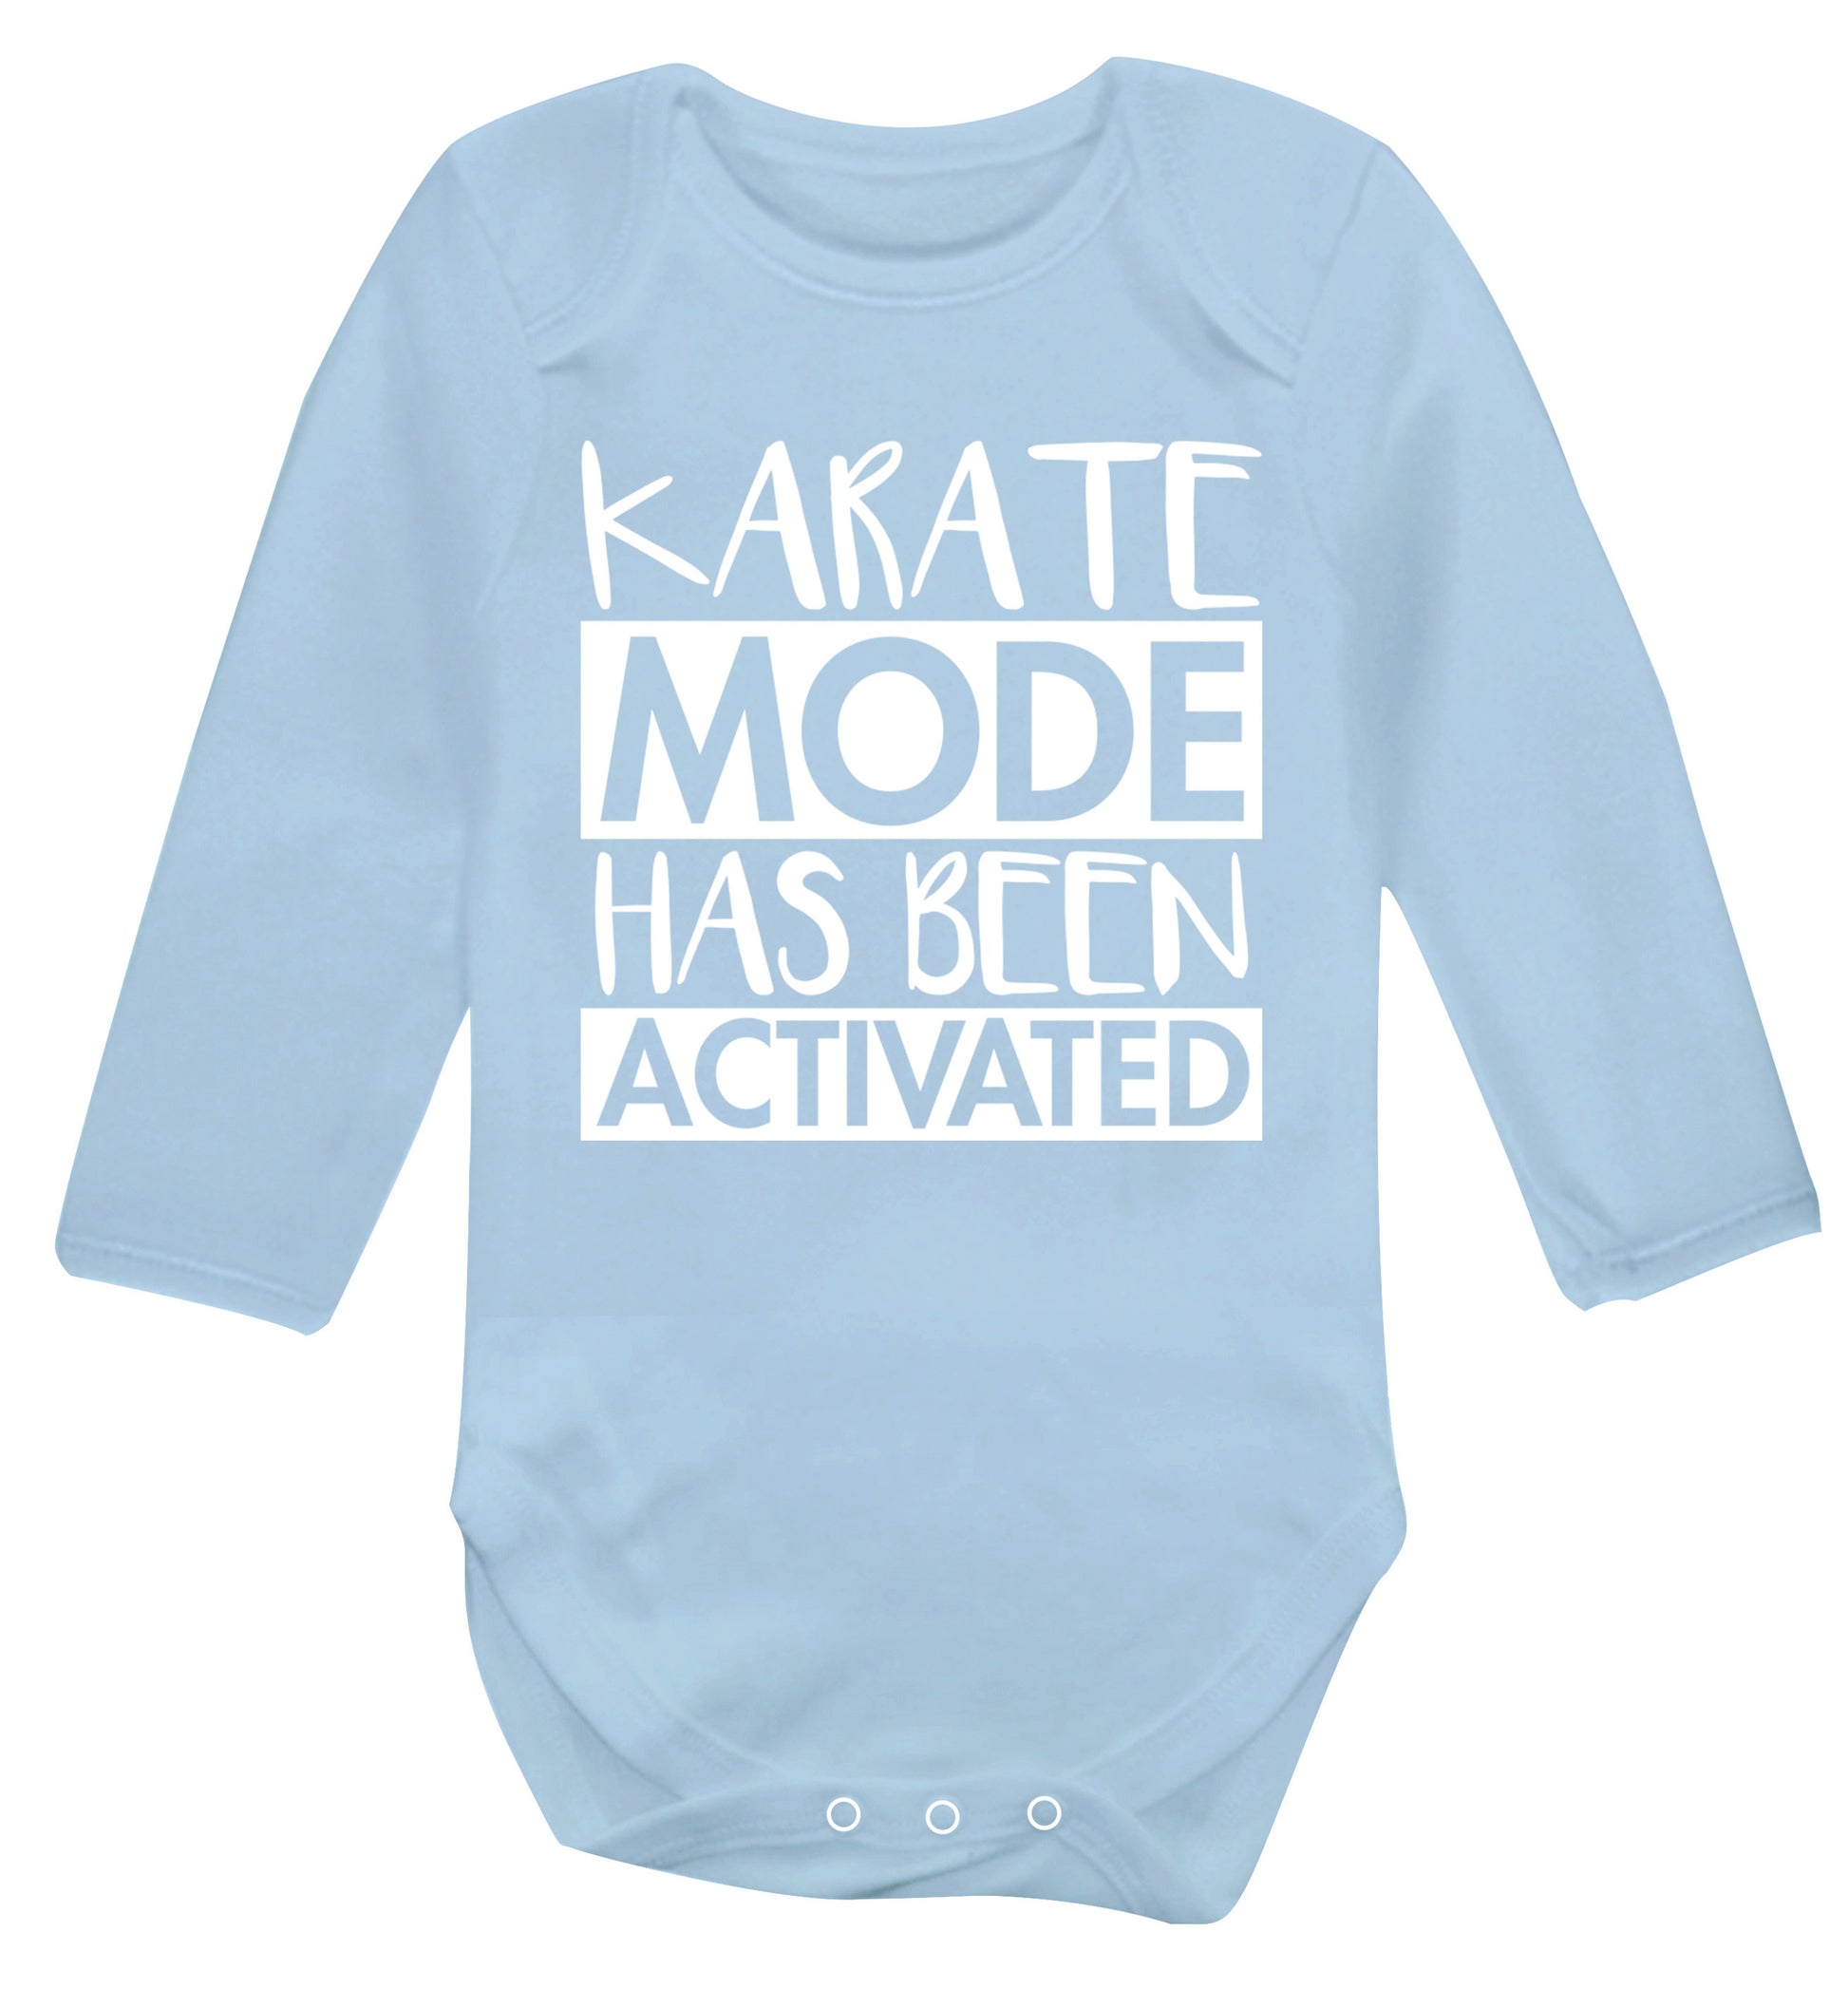 Karate mode activated Baby Vest long sleeved pale blue 6-12 months